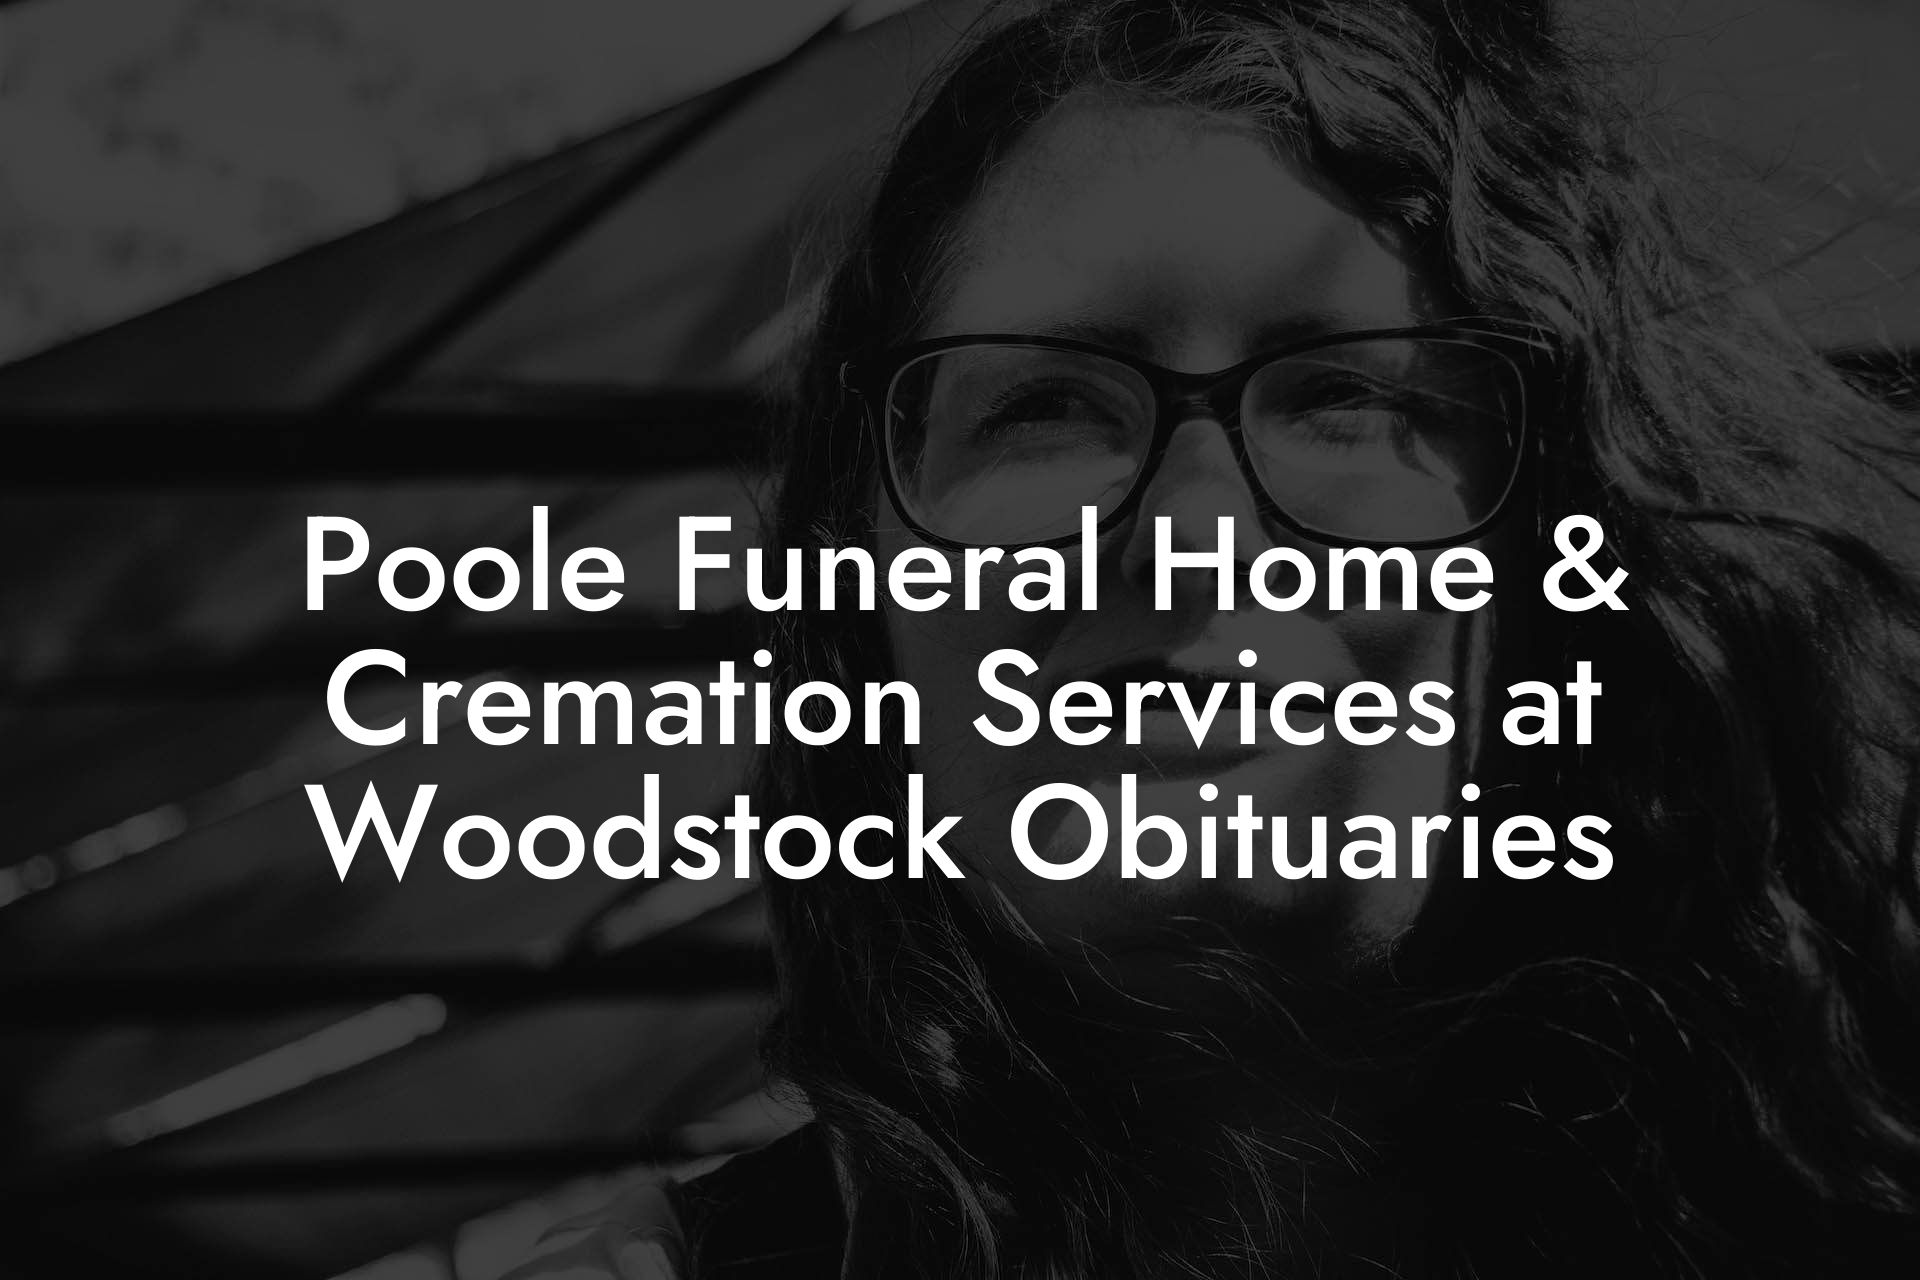 Poole Funeral Home & Cremation Services at Woodstock Obituaries